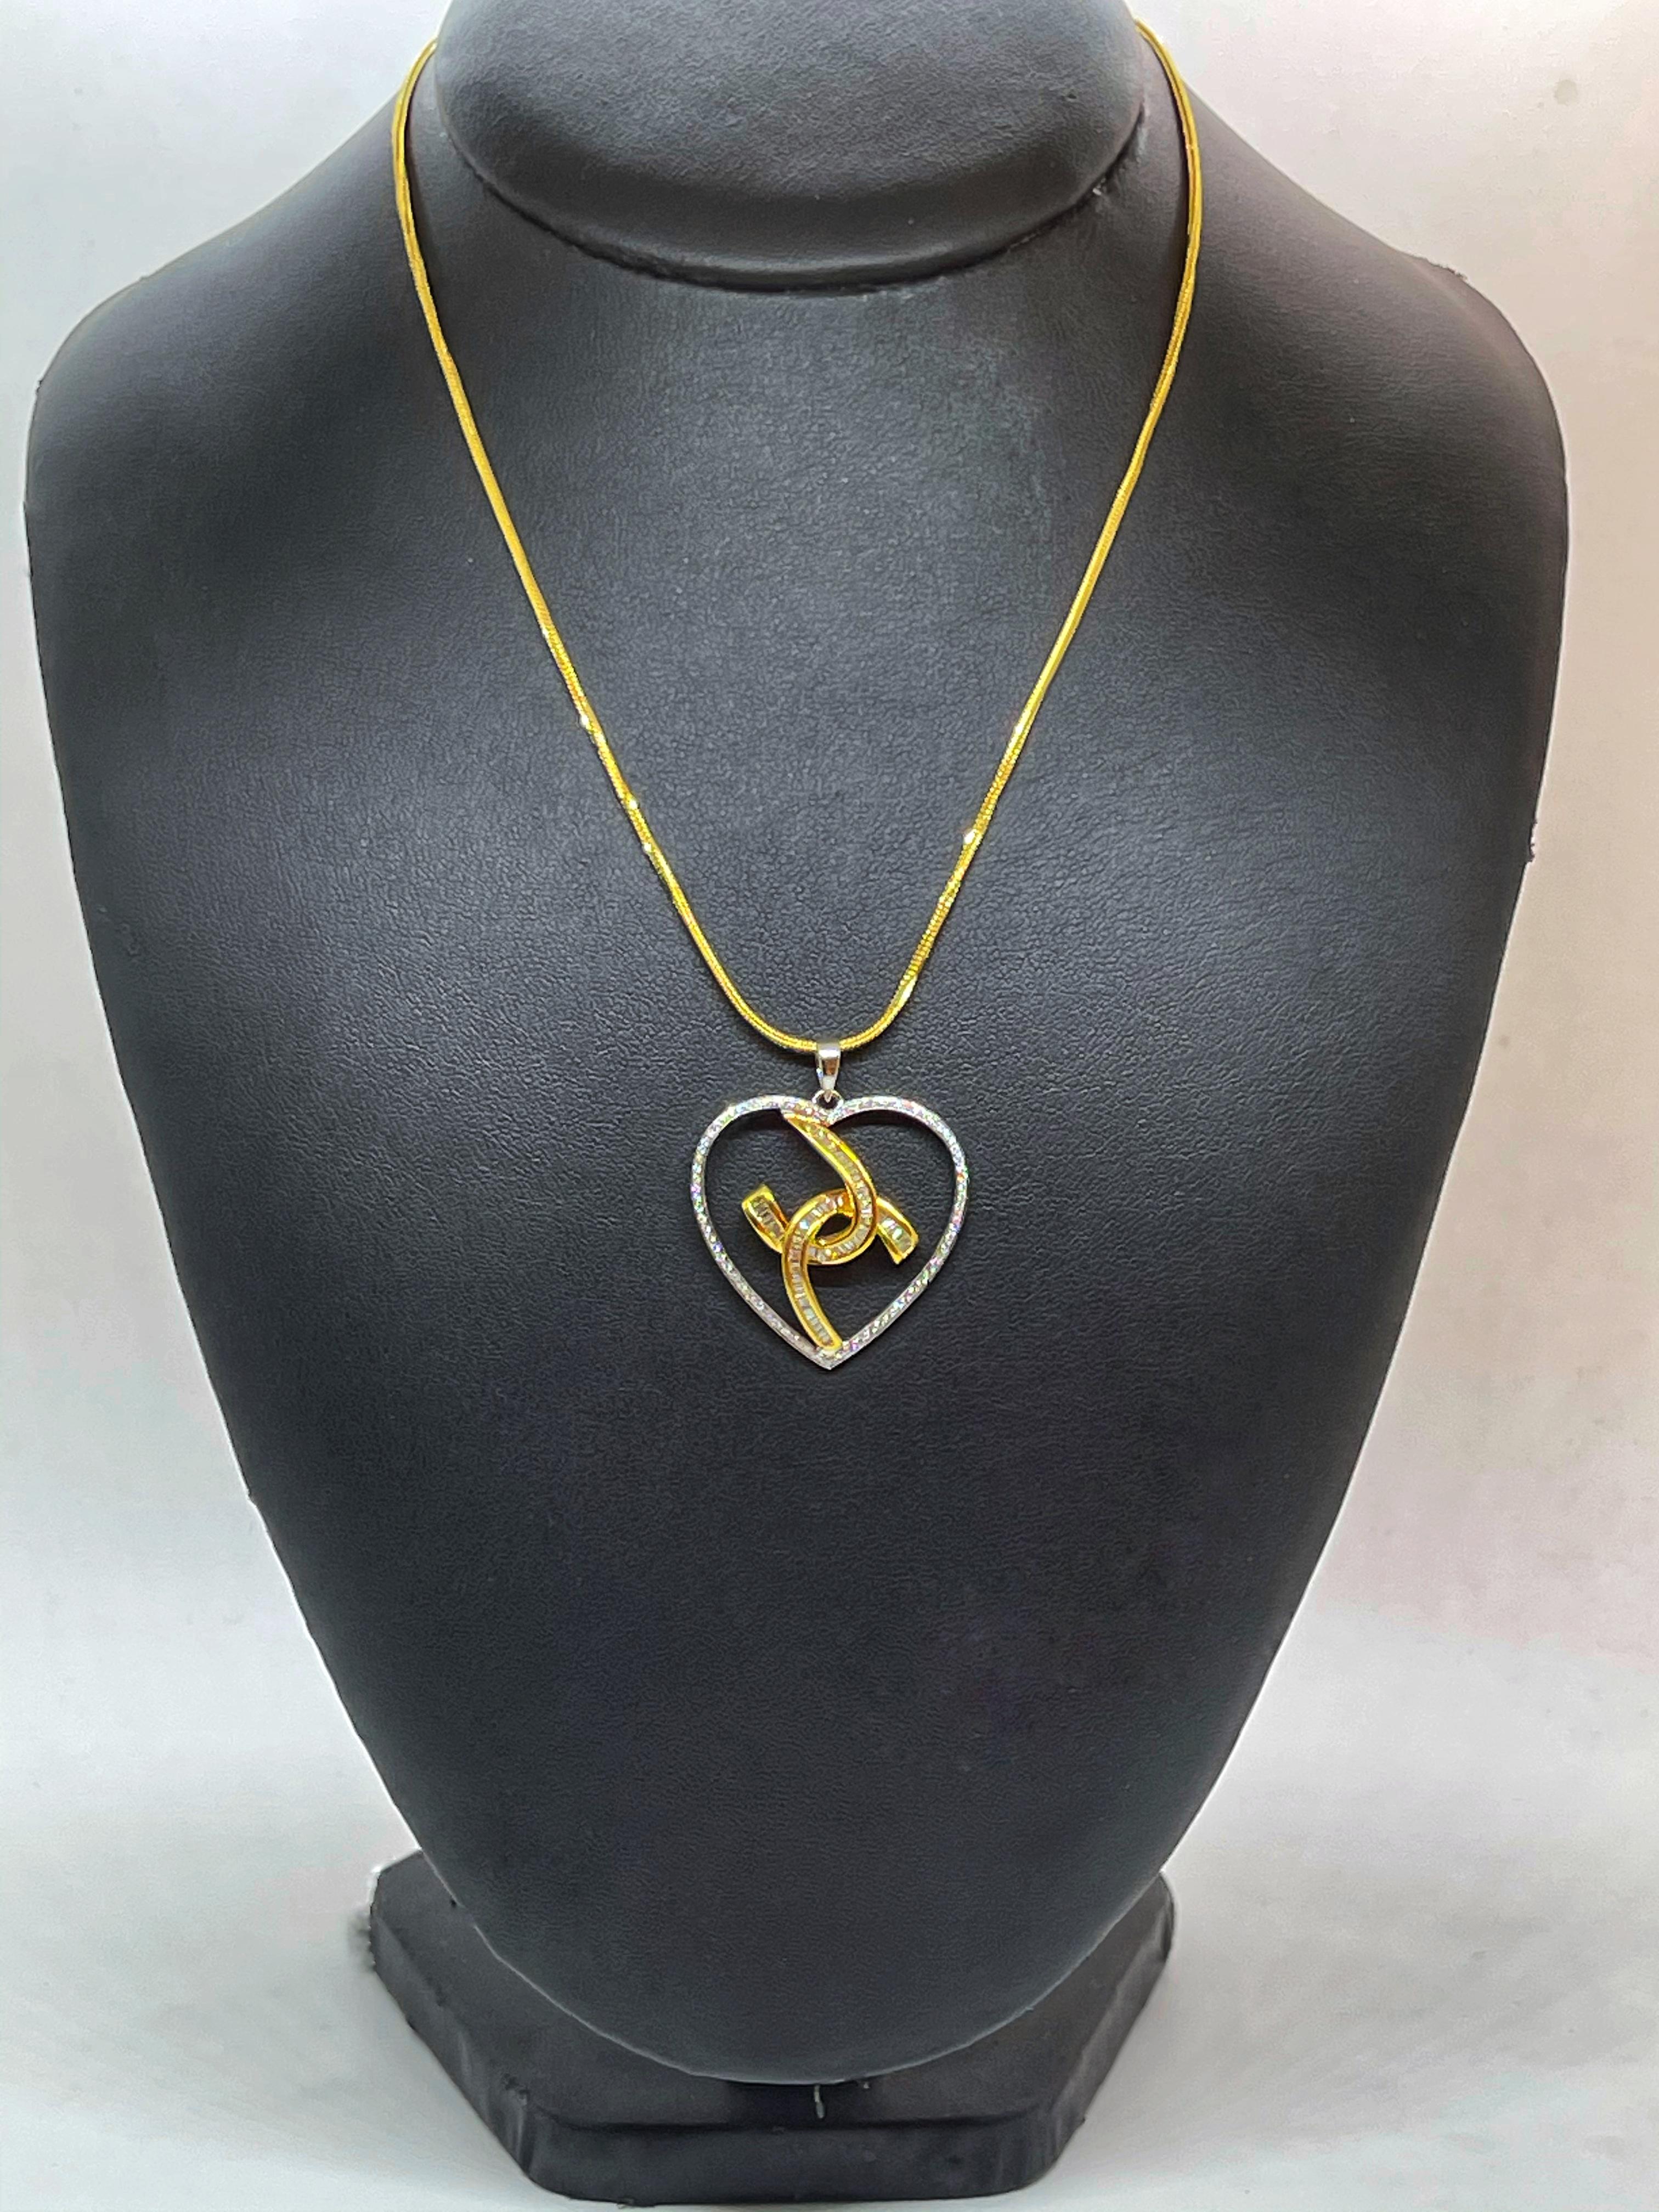 Elegant heart shaped yellow and white 18K diamond necklace. Two curved crossed lines in the center are paved with buguette cut diamonds. the heart in white gold is paved with round brilliant cut diamonds. The pendant goes together with a 18K yellow